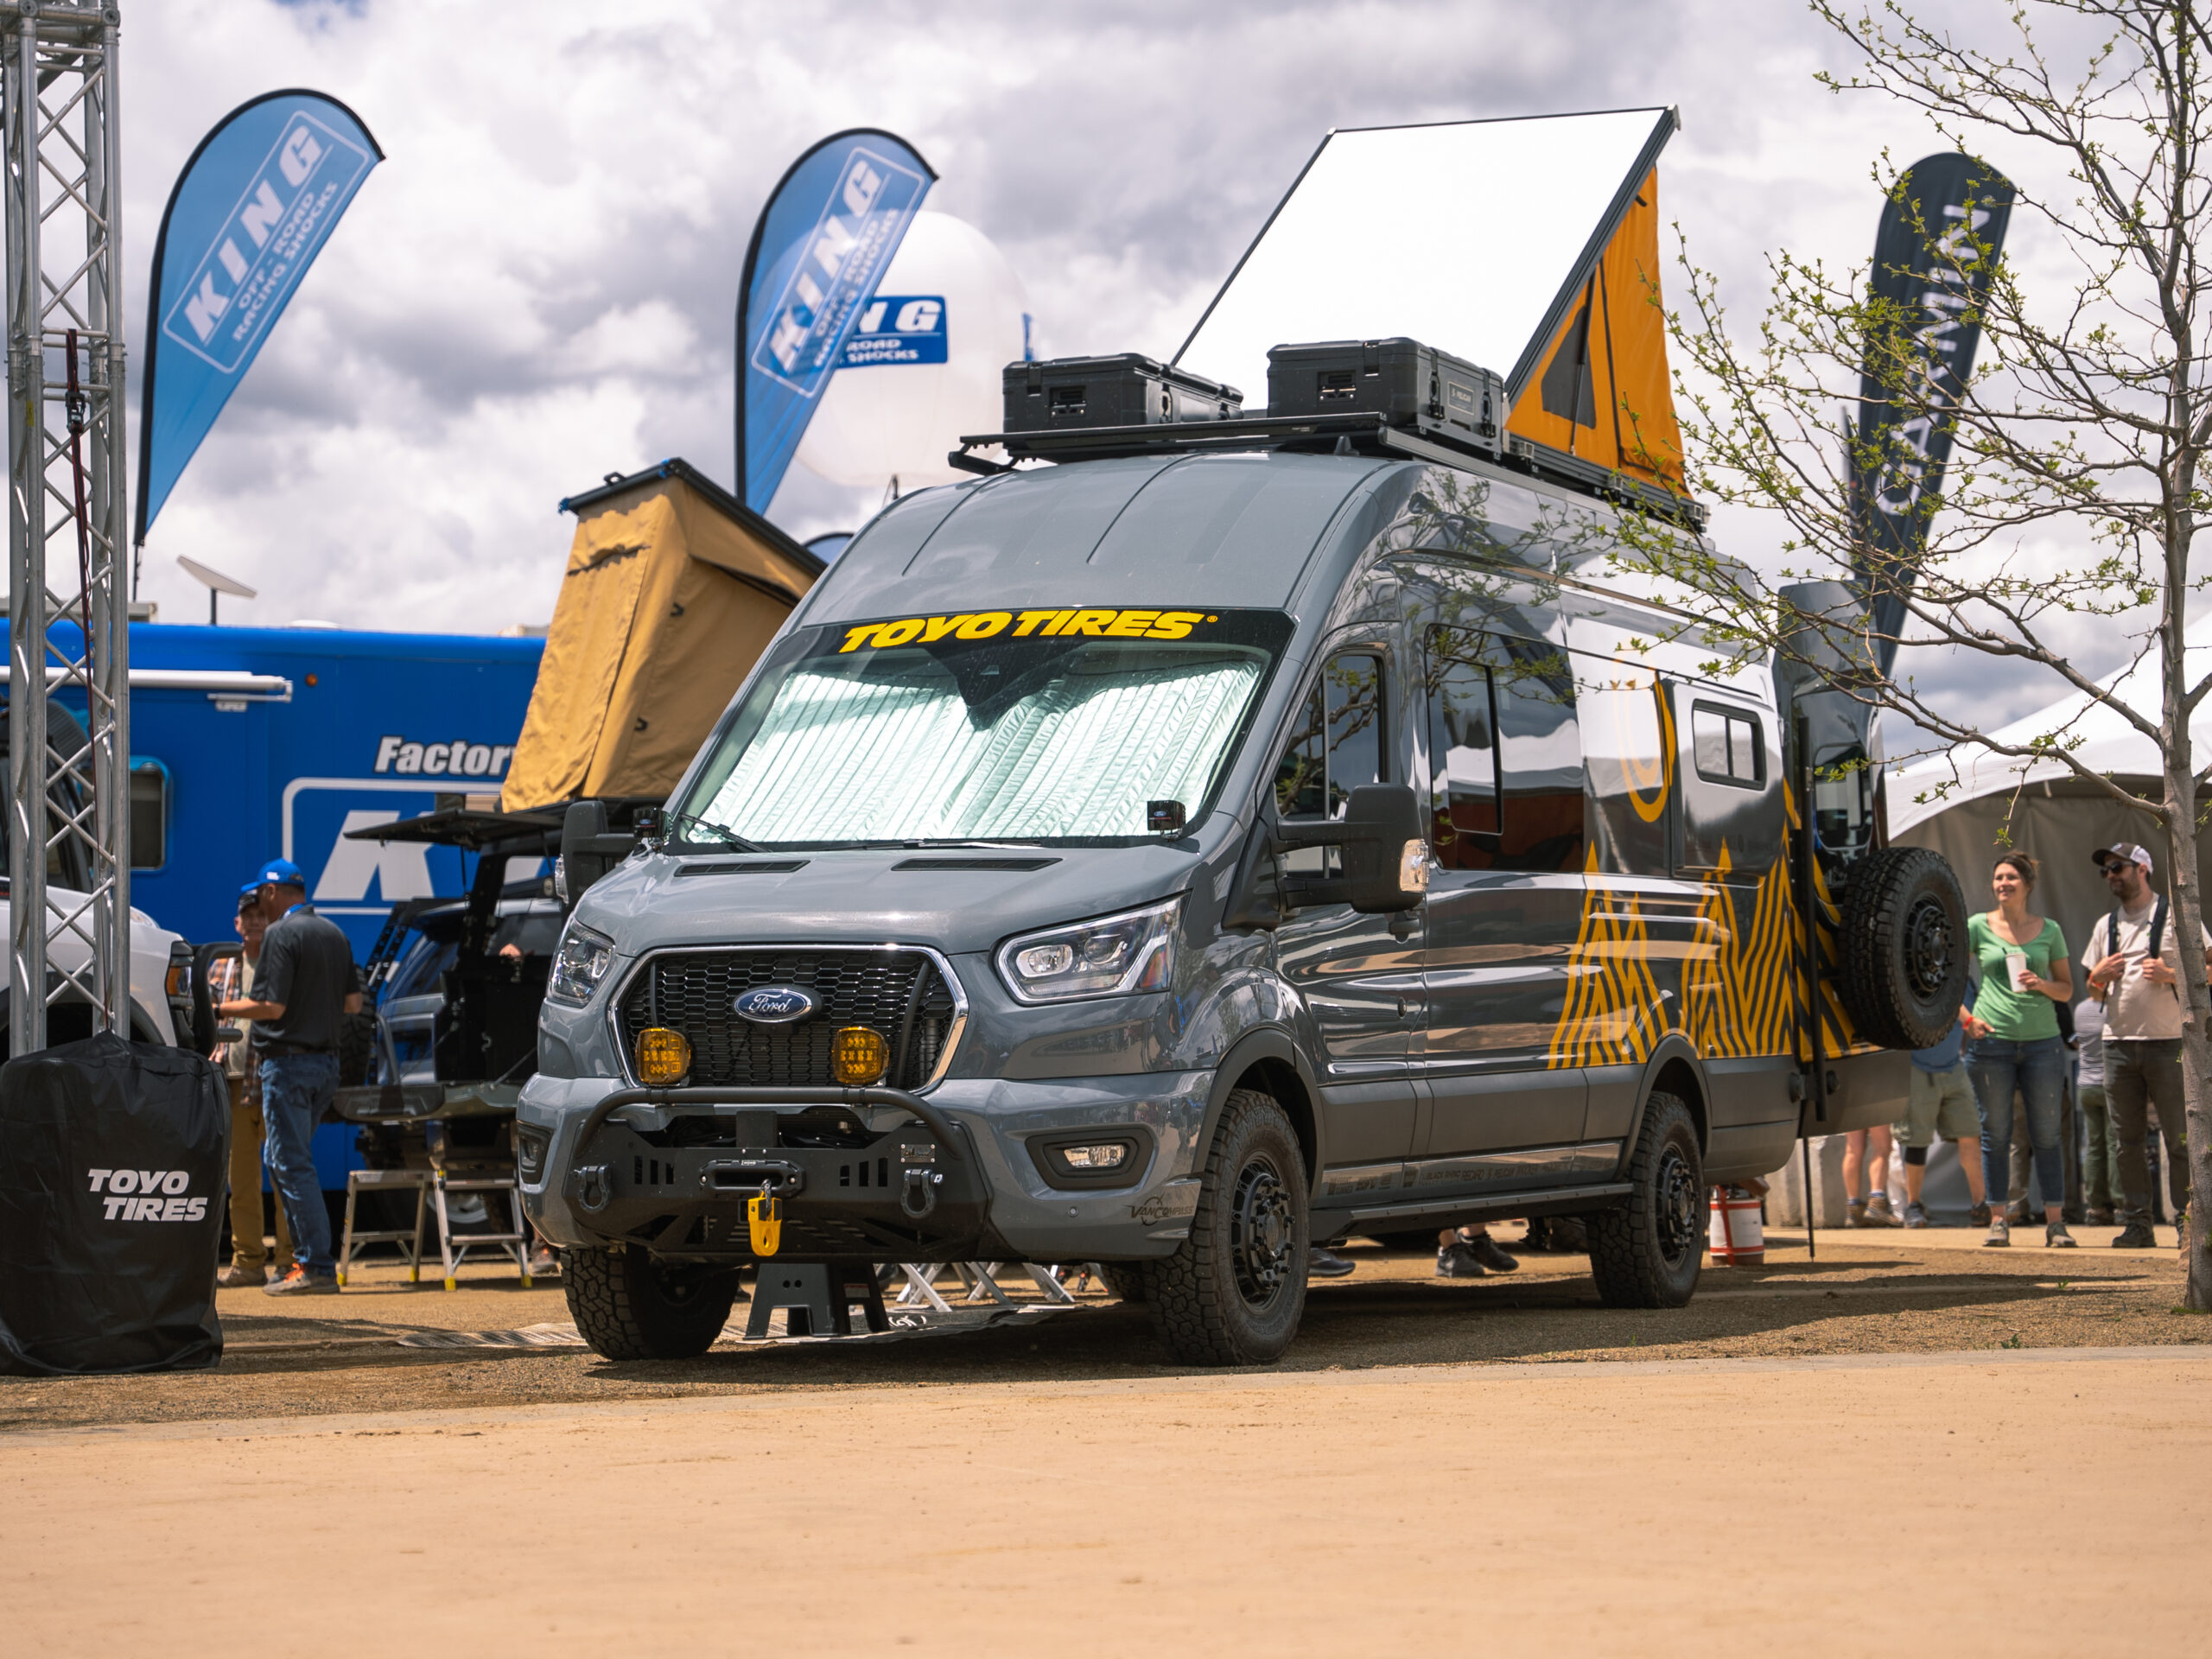 A gray Ford van with yellow graphics and yellow pop-up roof top tent.